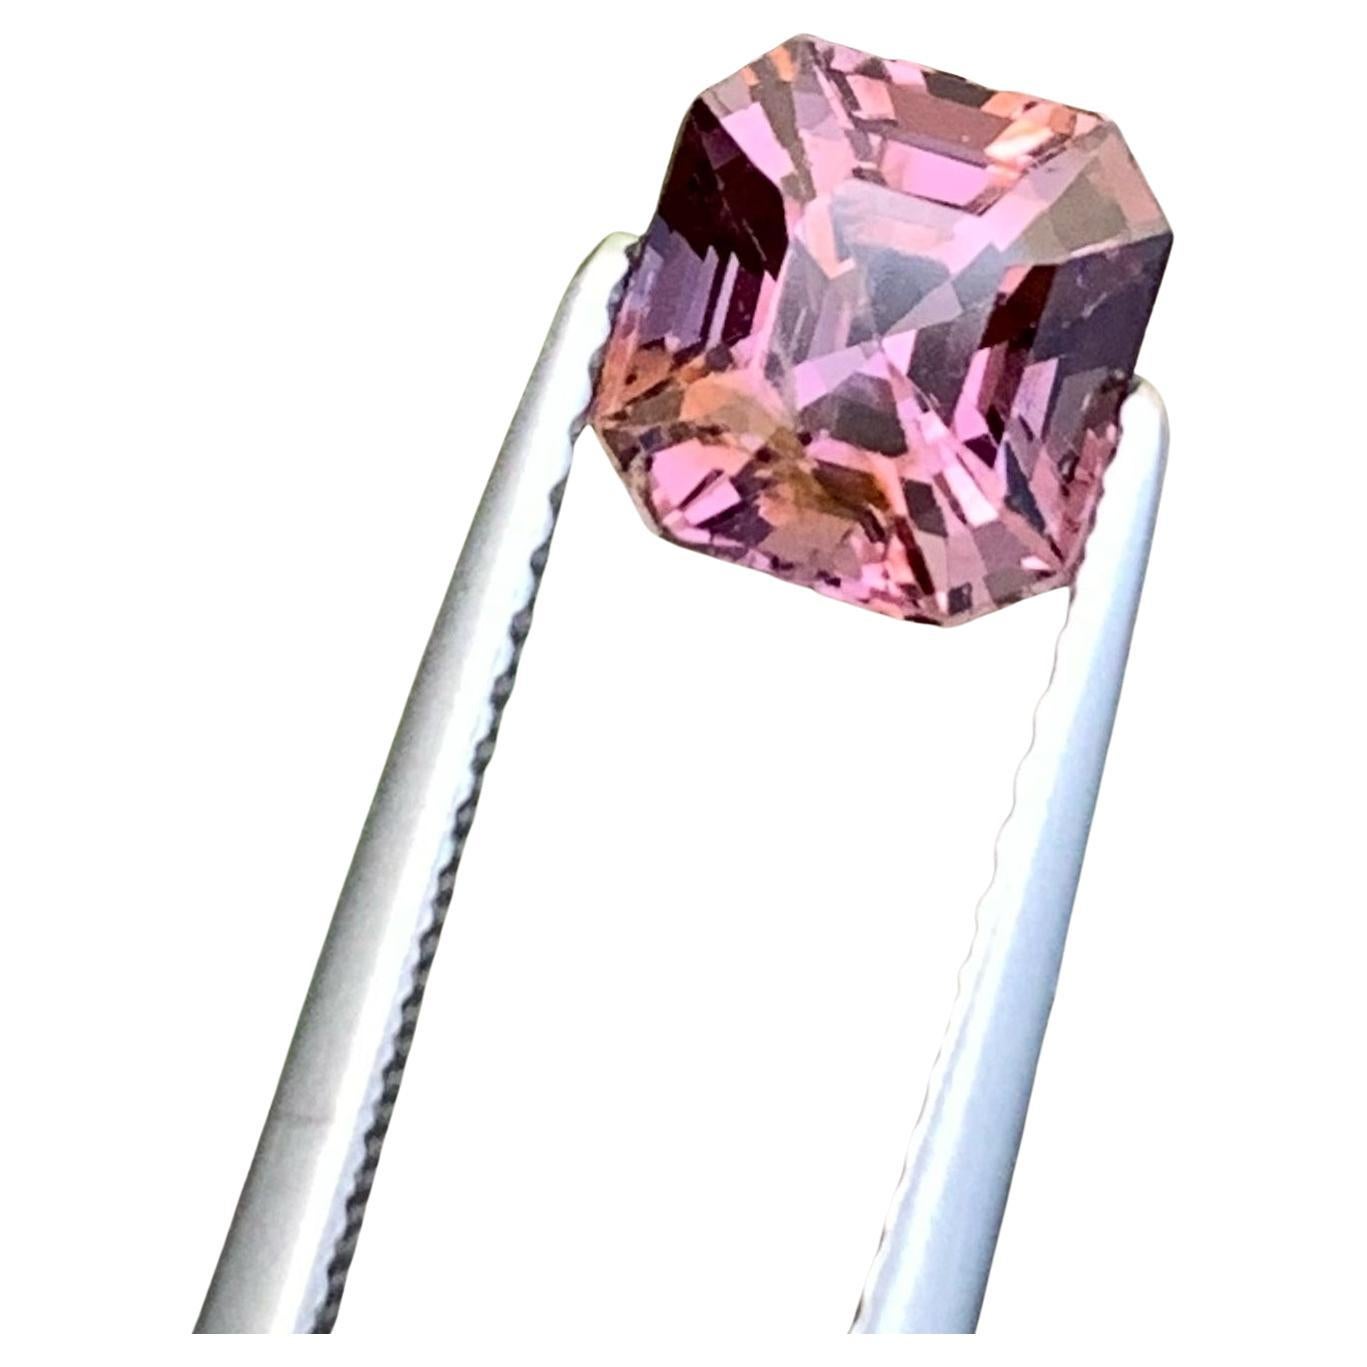 Stunning Natural Purplish Pink Spinel 1.75 CT Fancy Asscher Cut For Jewelry Size